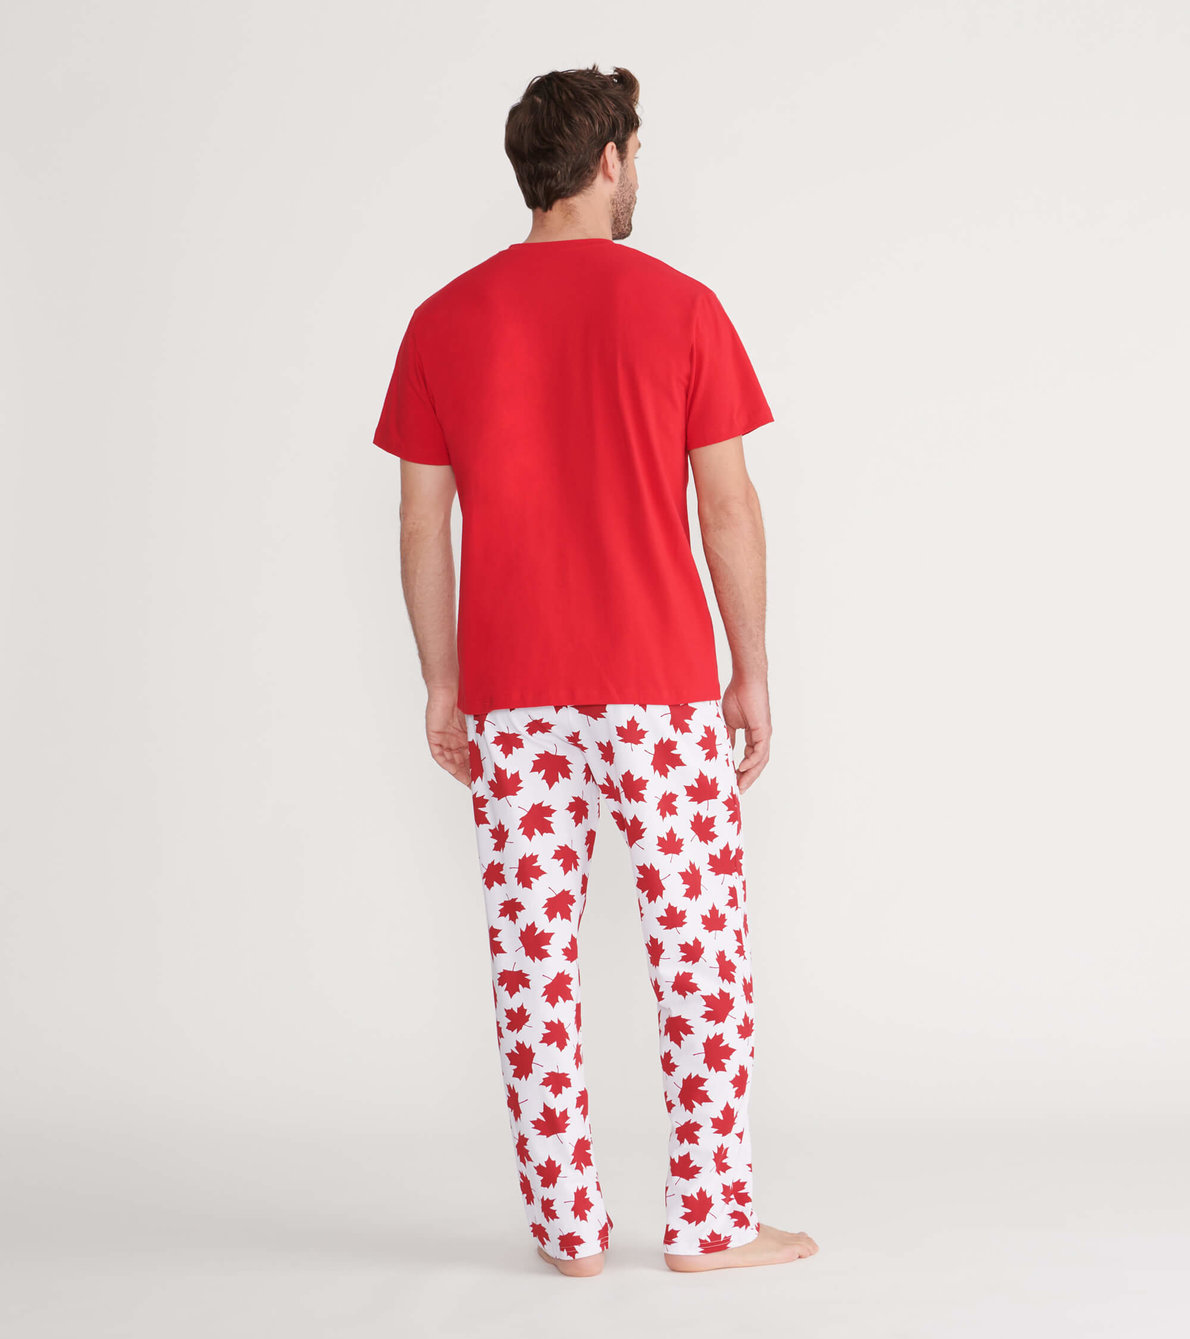 View larger image of Made In Canada Men's Jersey Pajama Pants